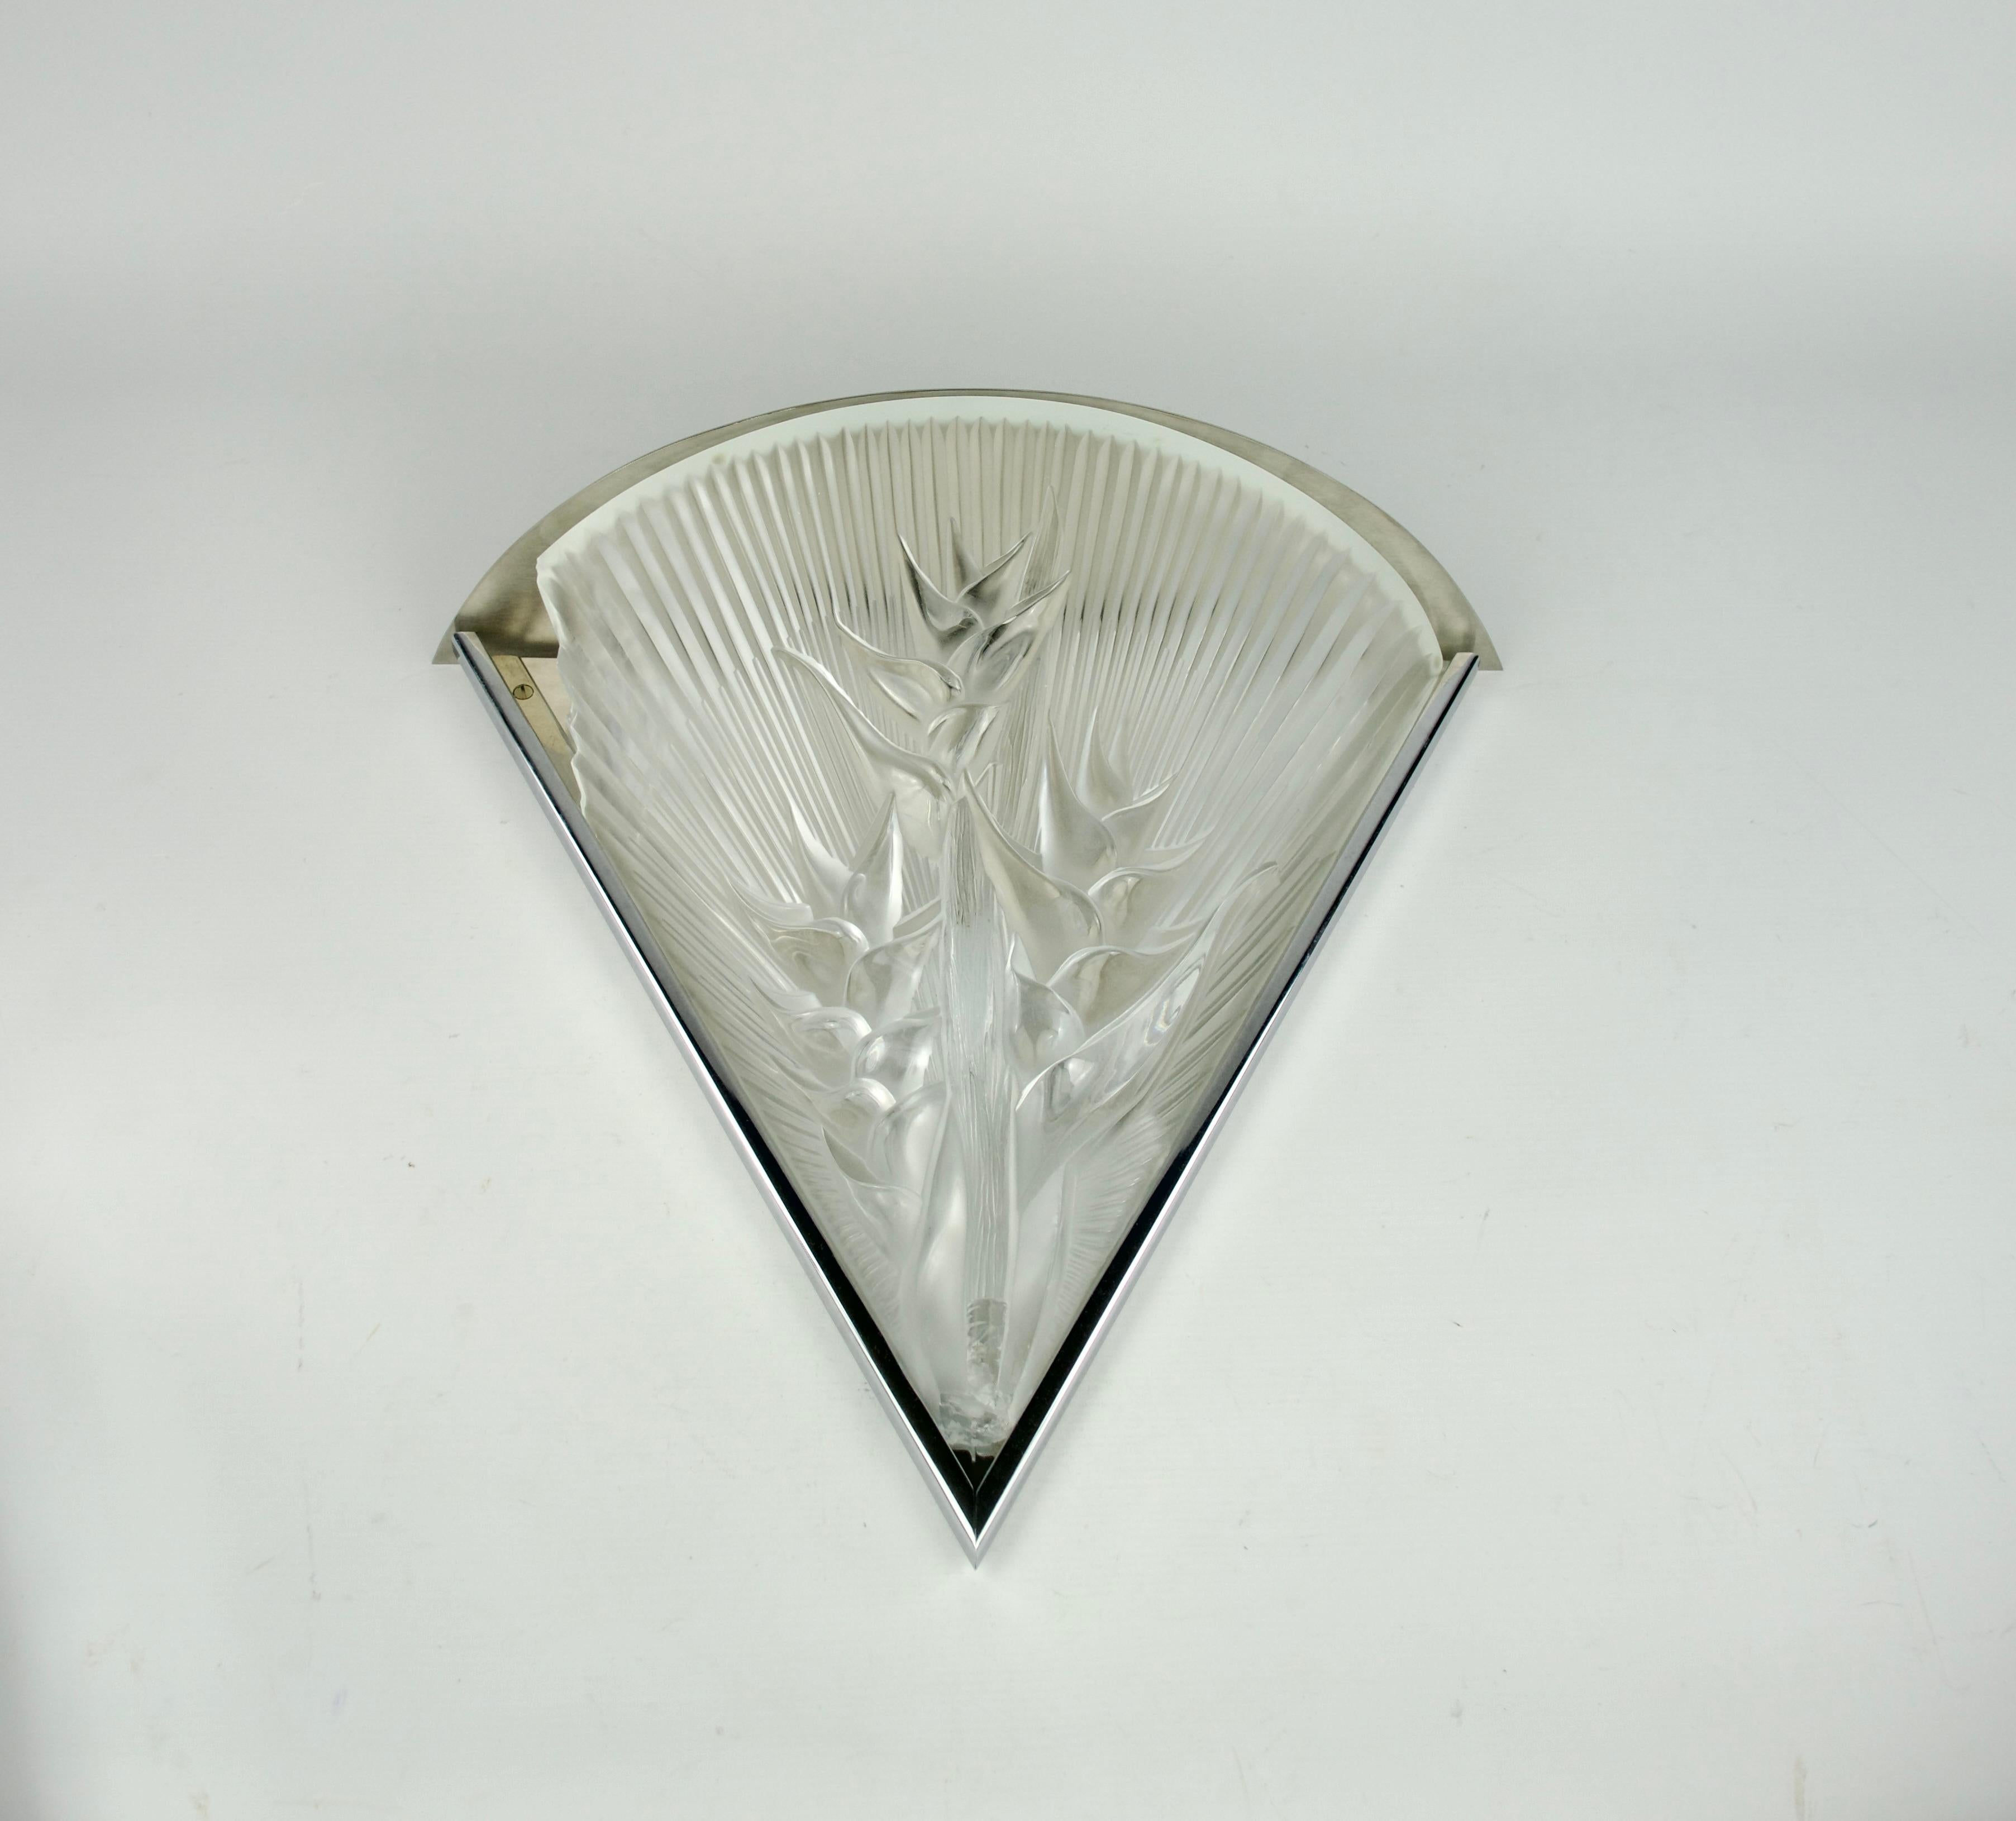 Beautiful Heliconia wall light designed by Marie-Claude for the Lalique Maison.

In distressed condition. with chips to all corners.

Dimensions in cm ( H x L x l ) : 42 x 44.5 x 15.5

Secure shipping.